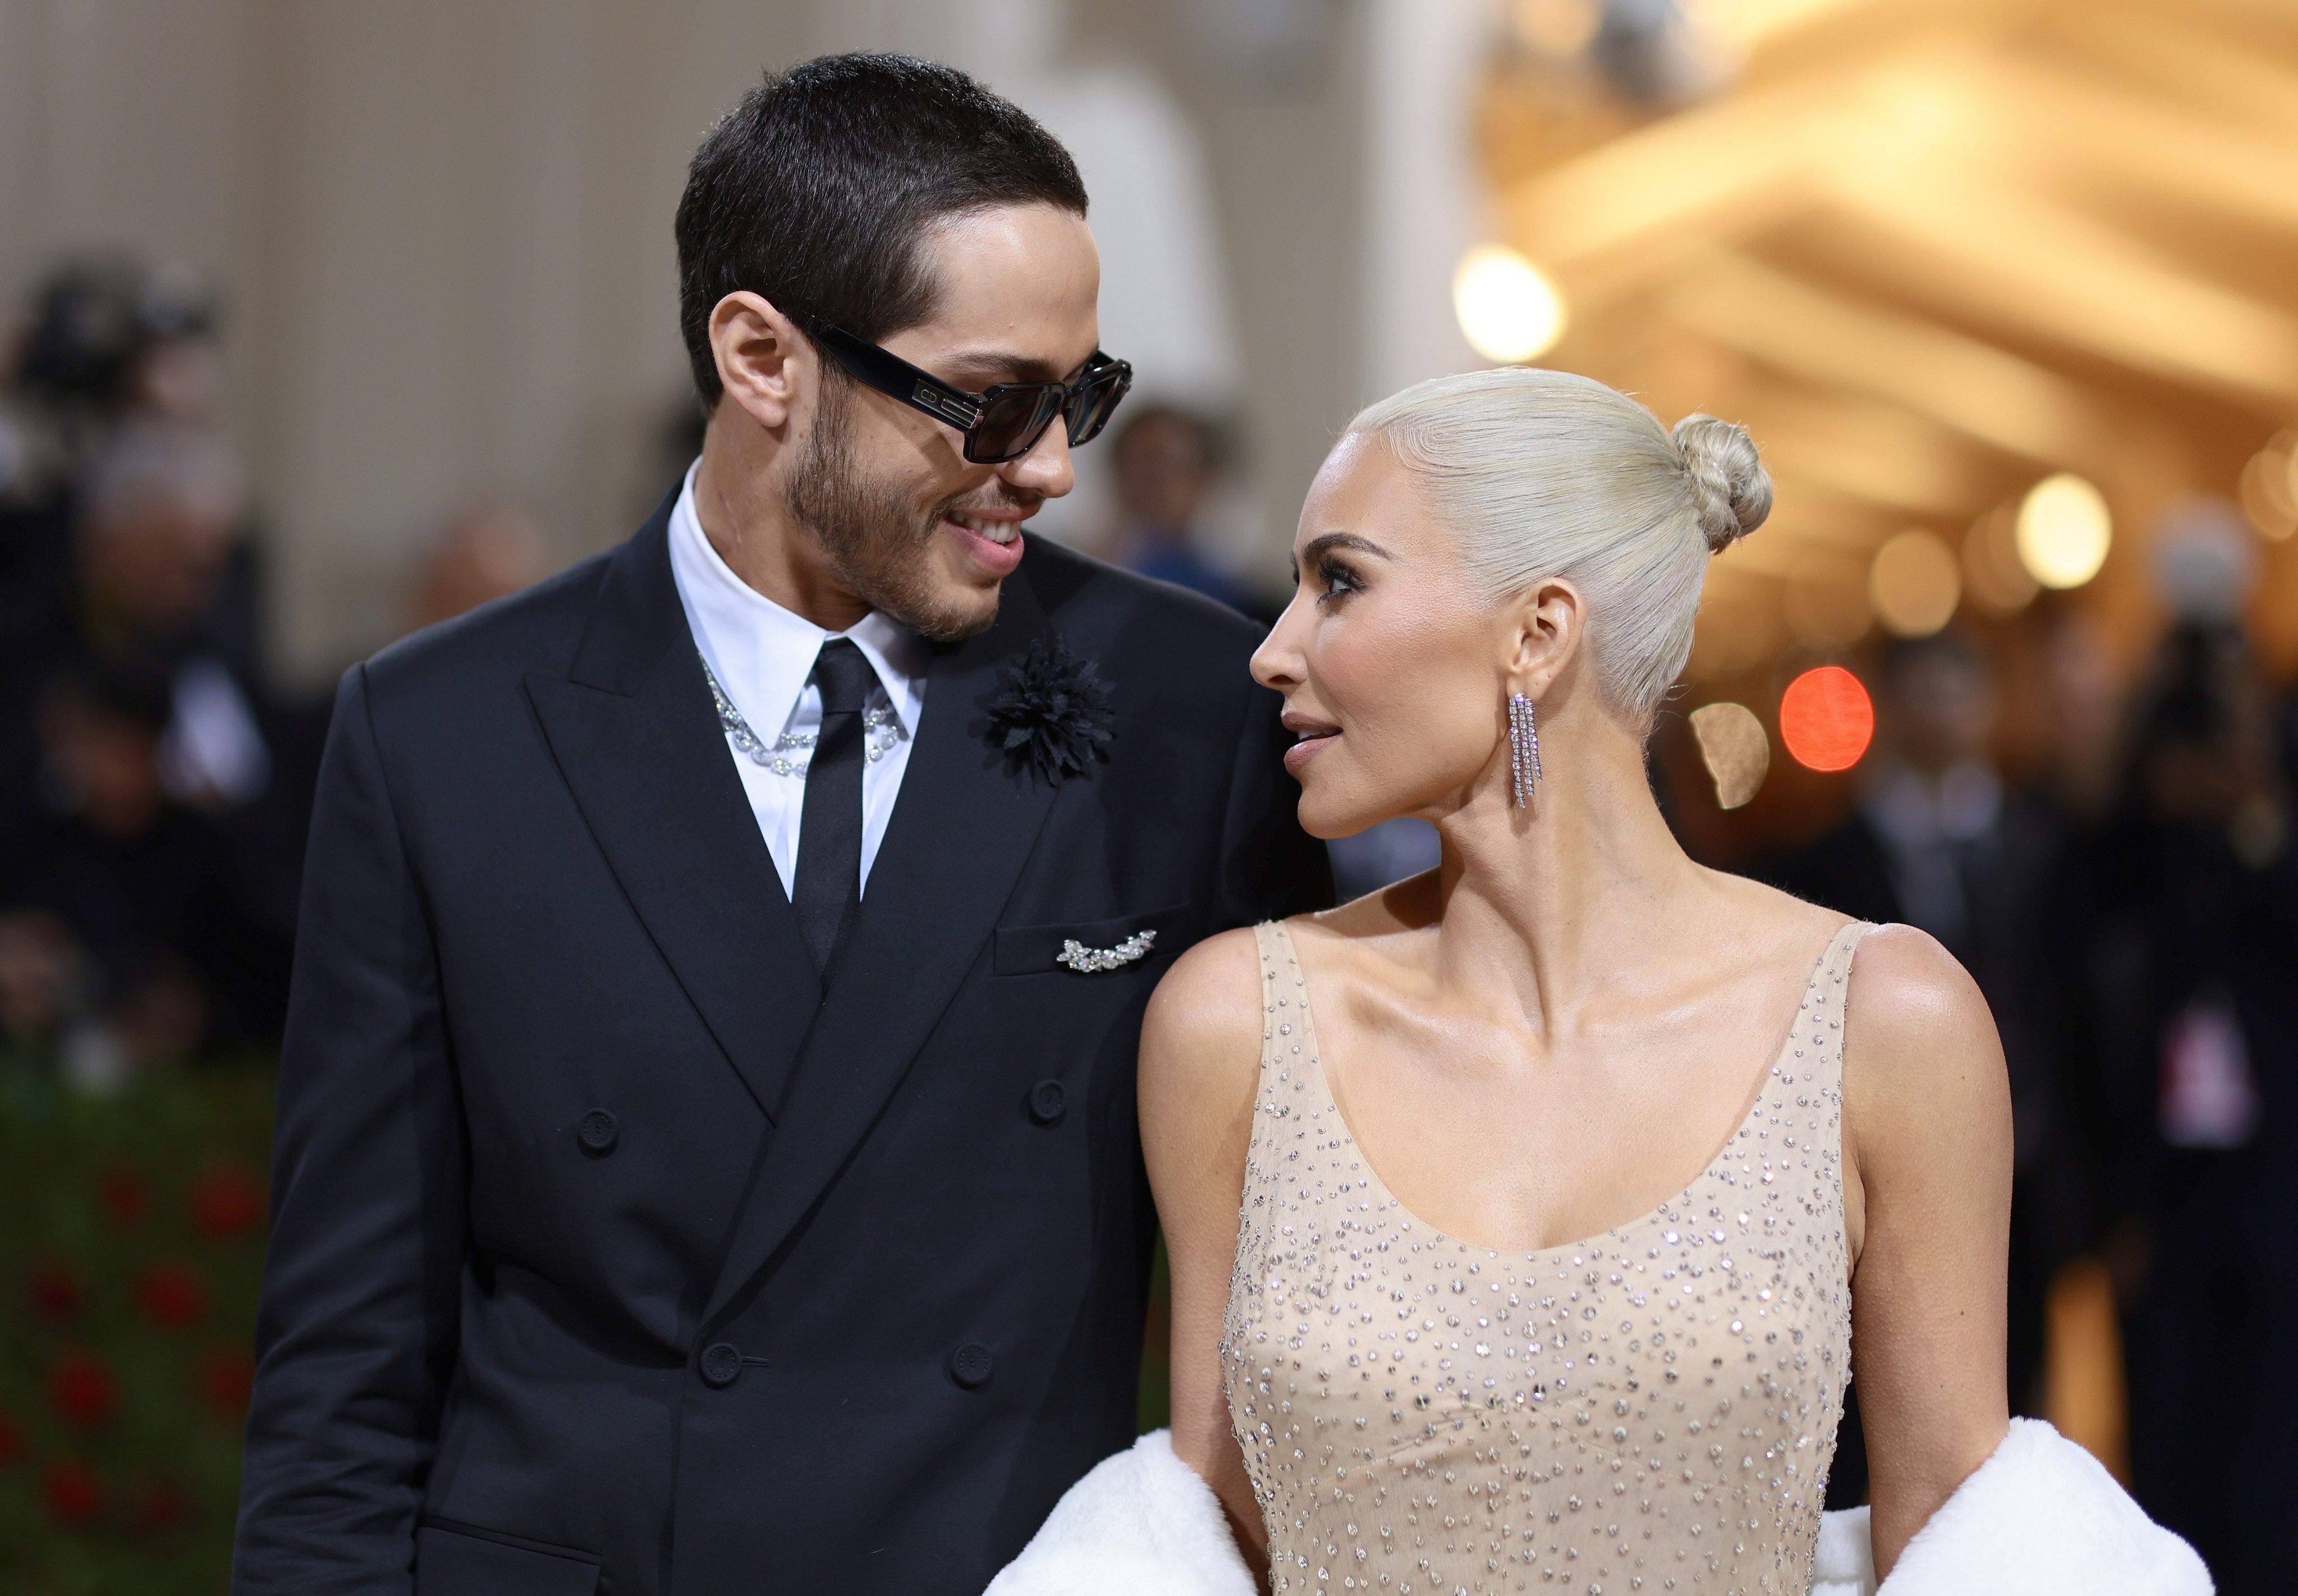 Pete Davidson with Kim Kardashian at the 2022 Met Gala at The Metropolitan Museum of Art in New York on May 2, 2022. The American comedian has dated a string of famous women including Ariana Grande, Kate Beckinsale, Kaia Gerber, Margaret Qualley and Phoebe Dynevor. Photo: Getty Images